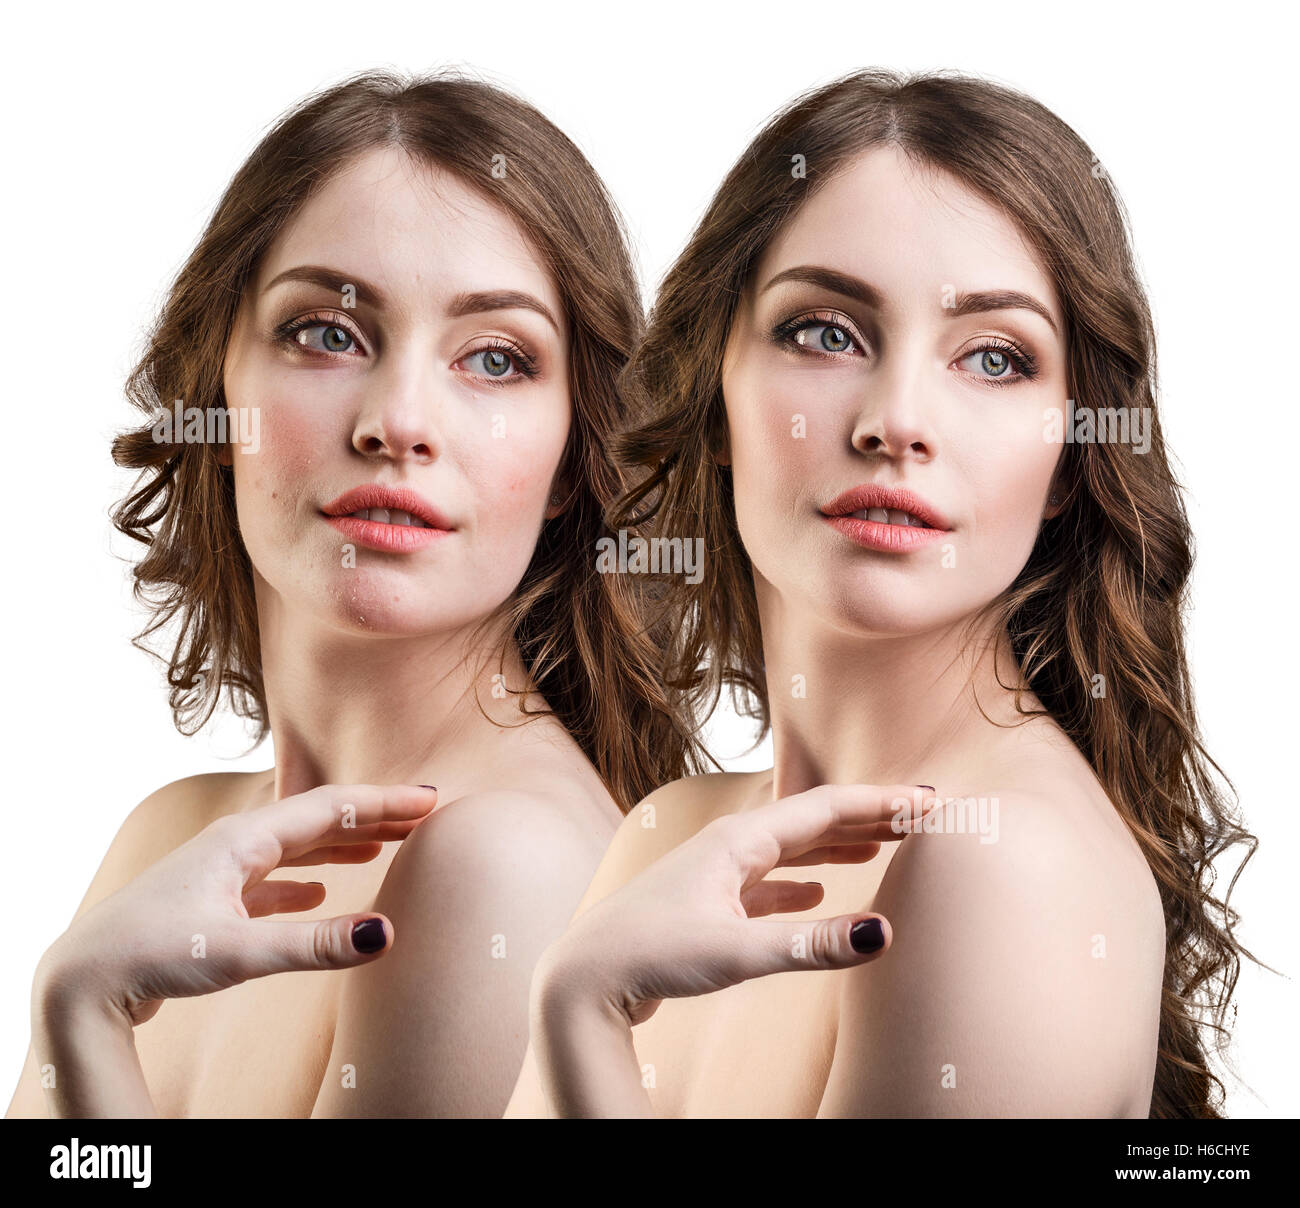 Portrait of young girl with and without makeup Stock Photo